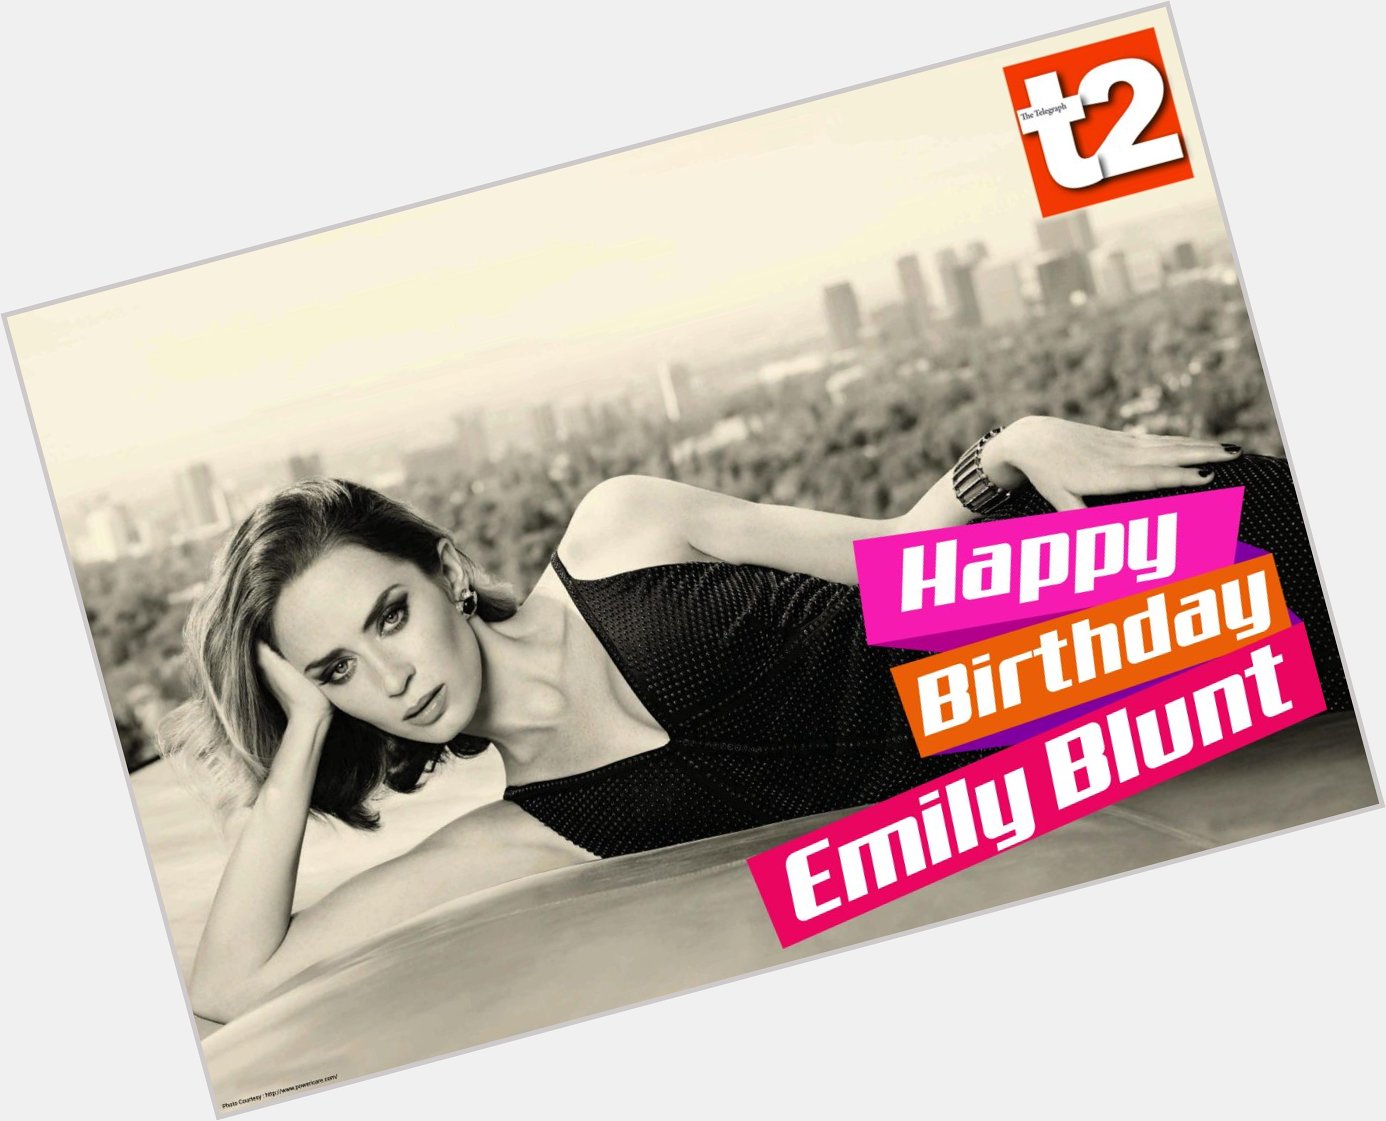 Join us in wishing Emily Blunt a vary happy birthday! 